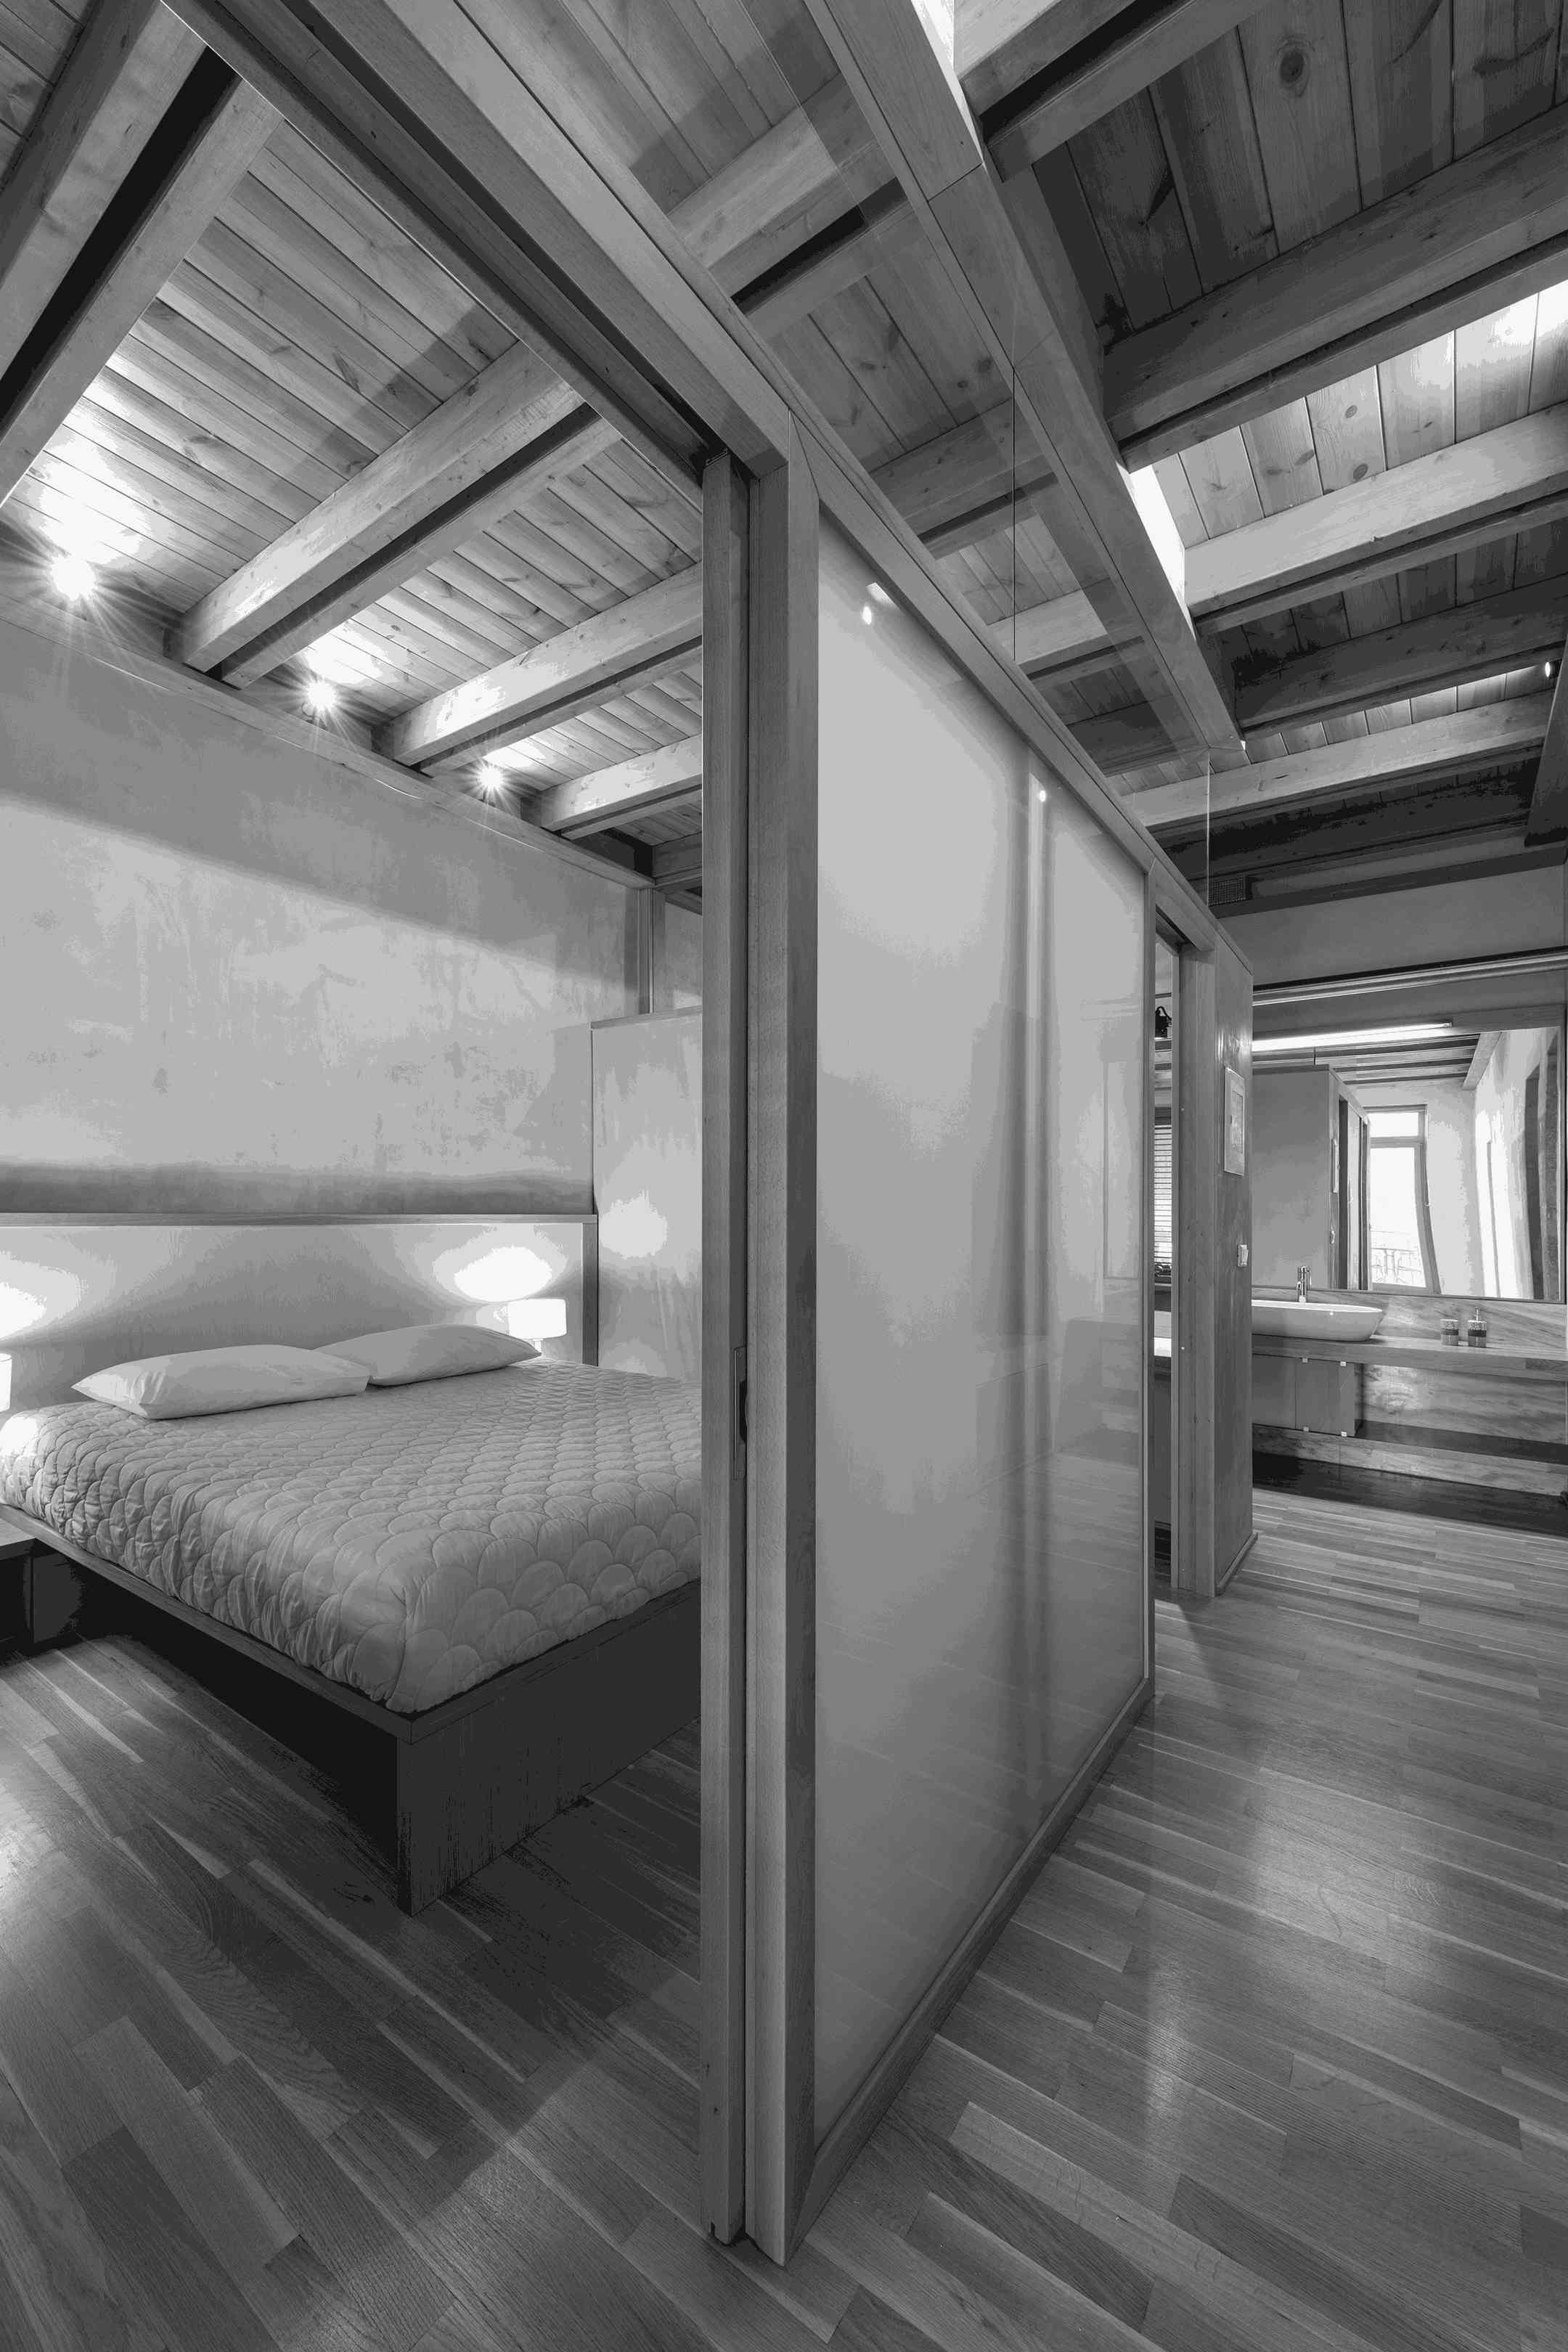 Rehabilitation of Two Buildings and Reuse as a Small Hotel in Chania, Crete by I.K. Verikakis Architectural Office No6